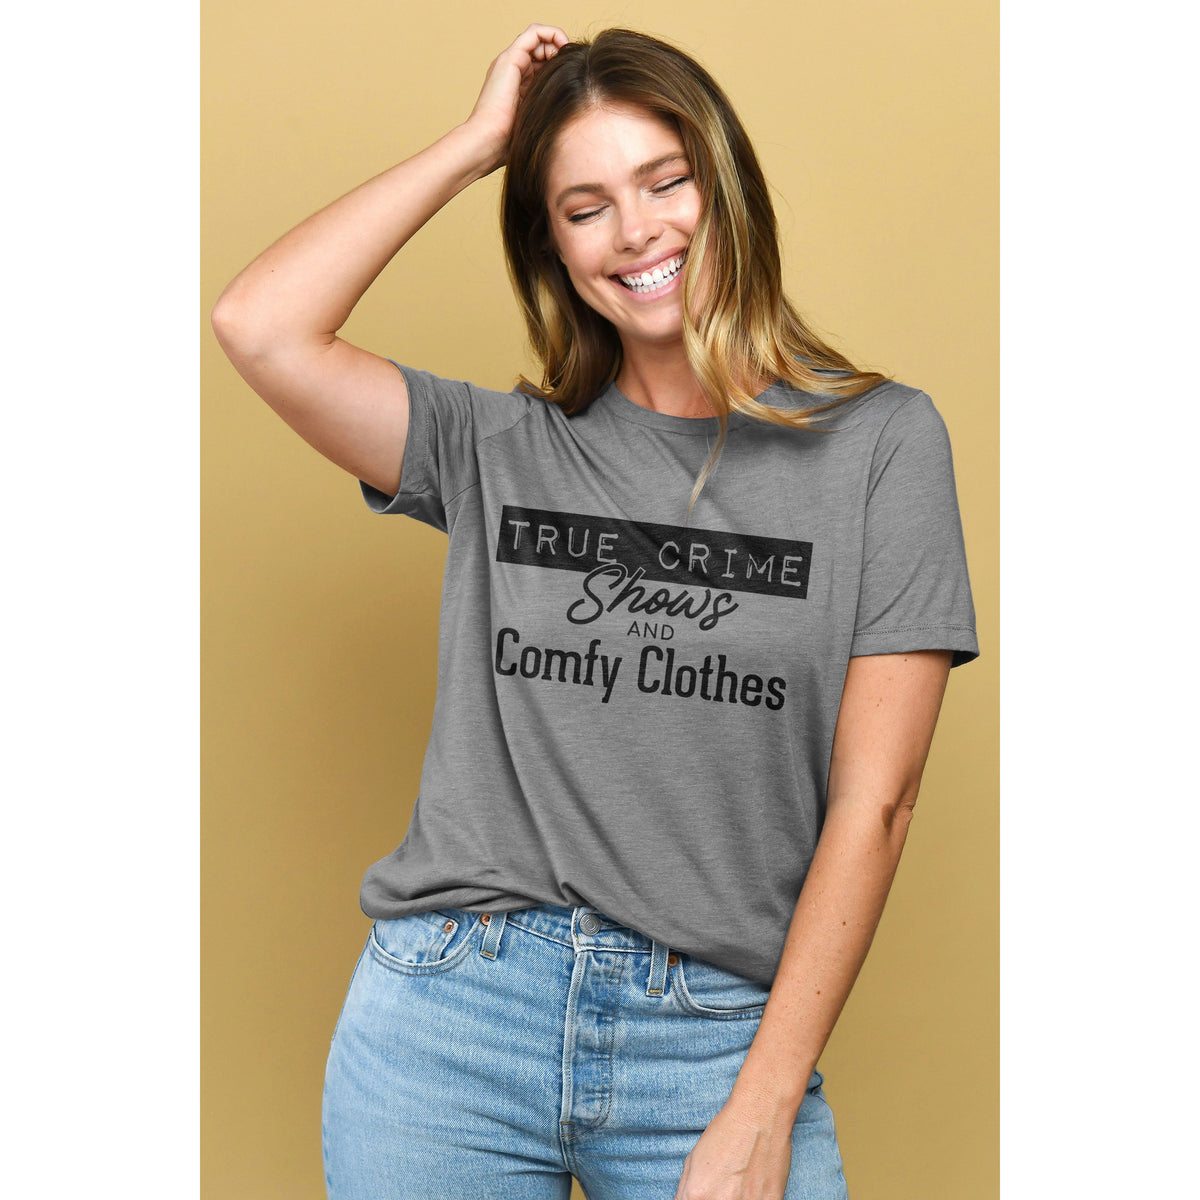 True Crime Shows And Comfy Clothes Women's Relaxed Crewneck Graphic T-Shirt  Top Tee